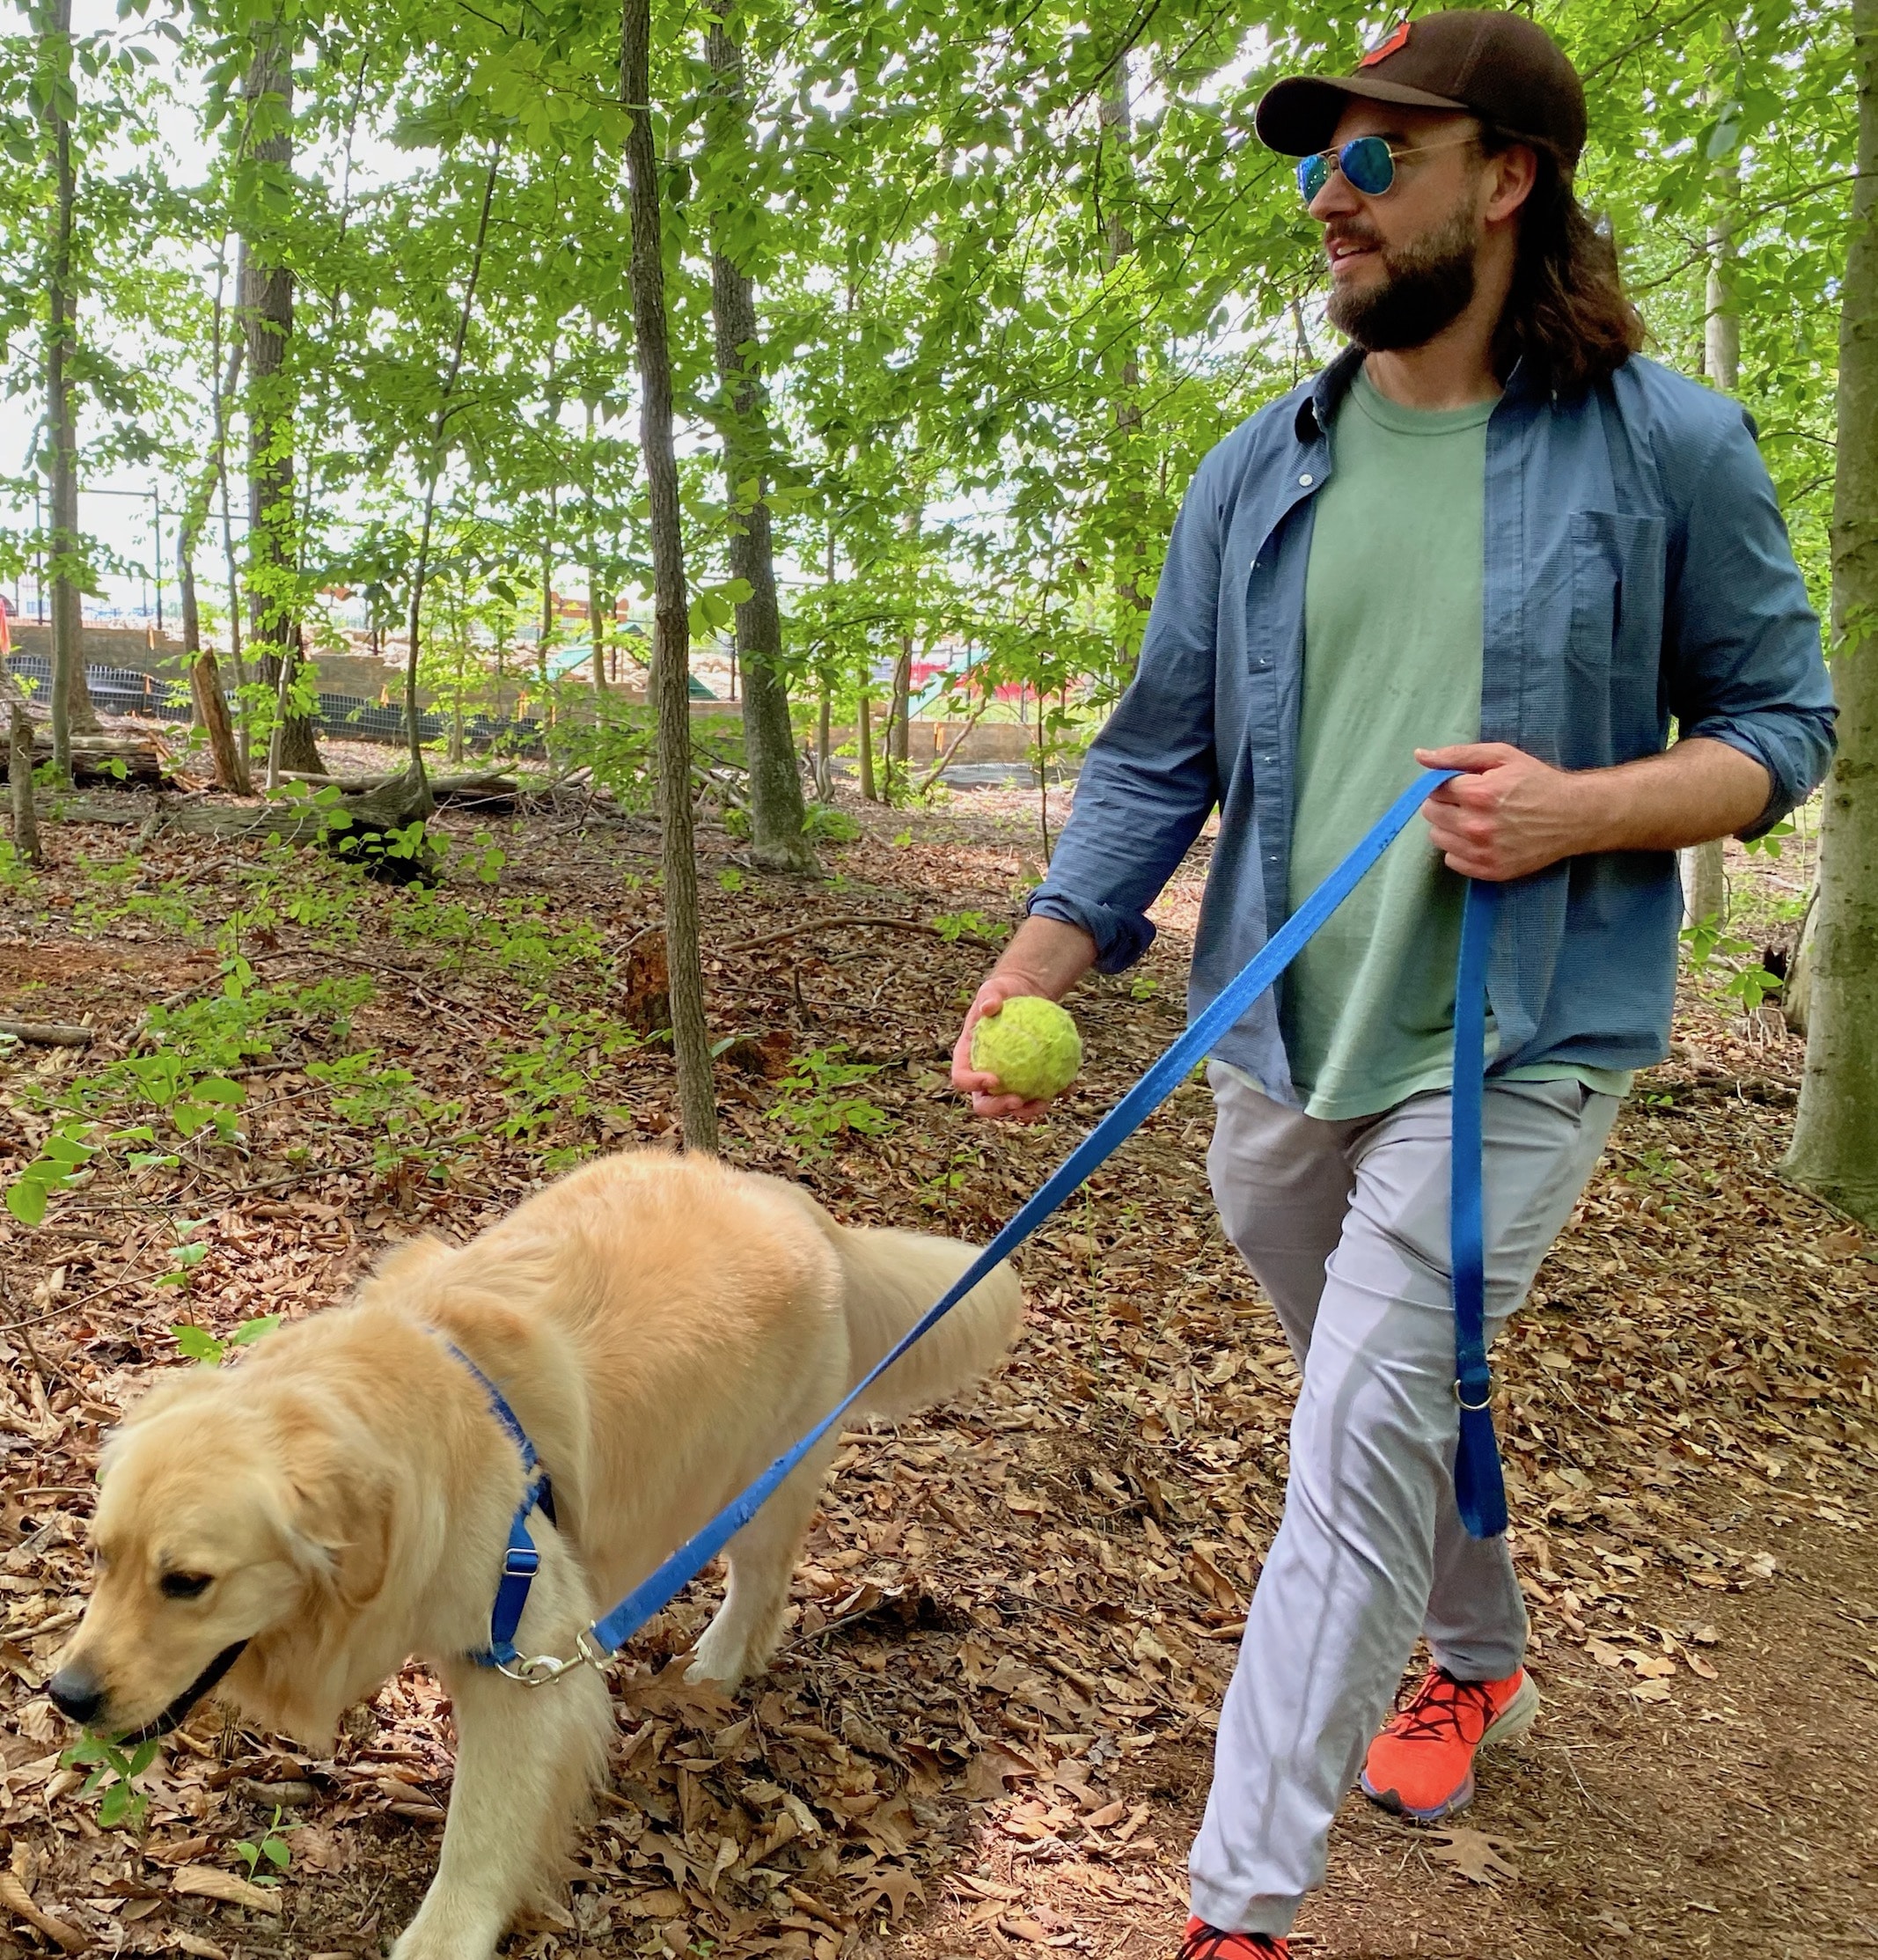 Take the dog for a walk on one of Watershed's many trails